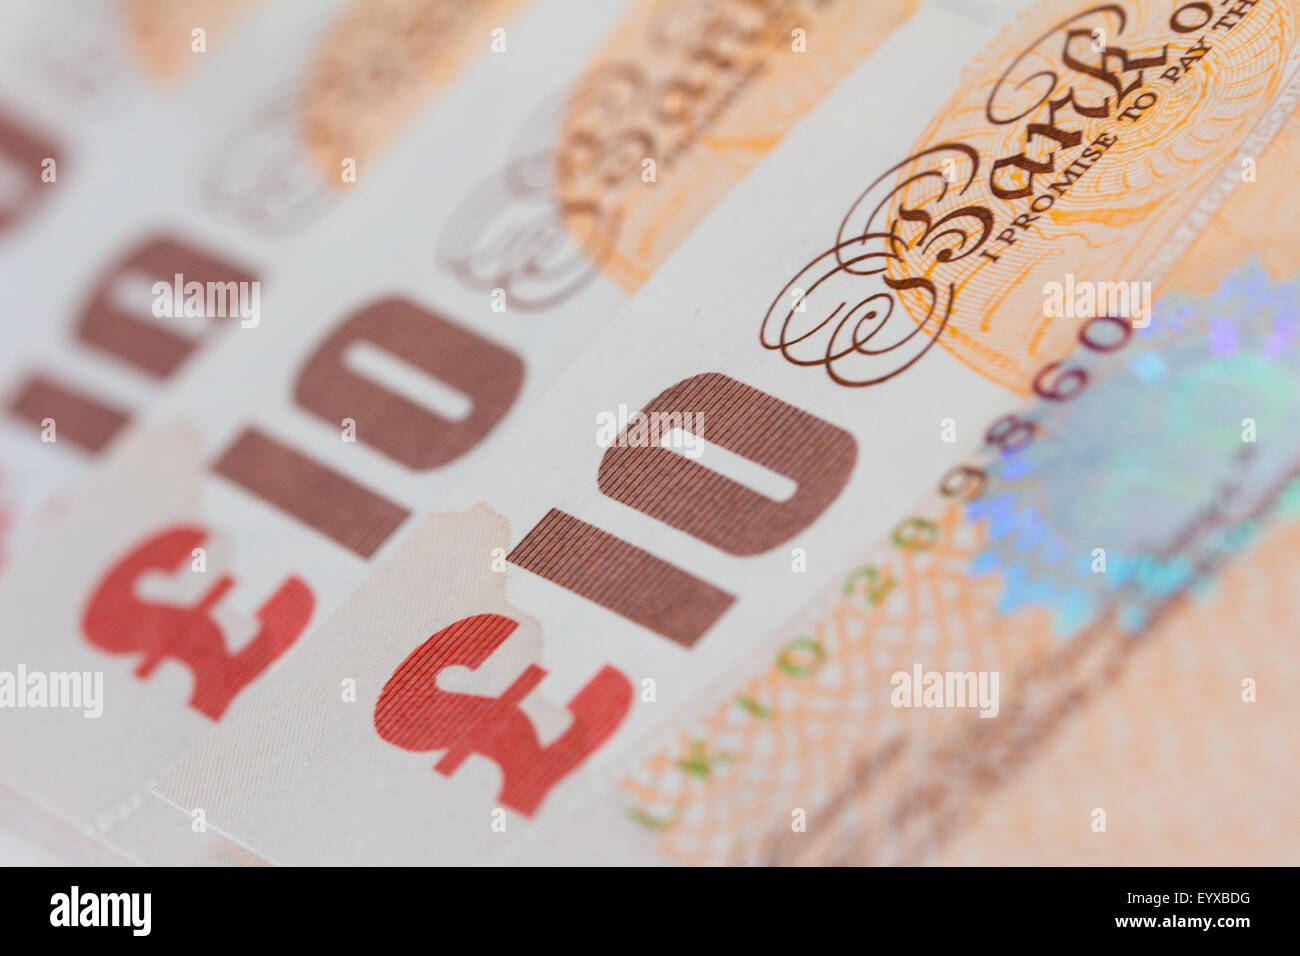 Background of ten UK pound bank notes (sterling) Stock Photo